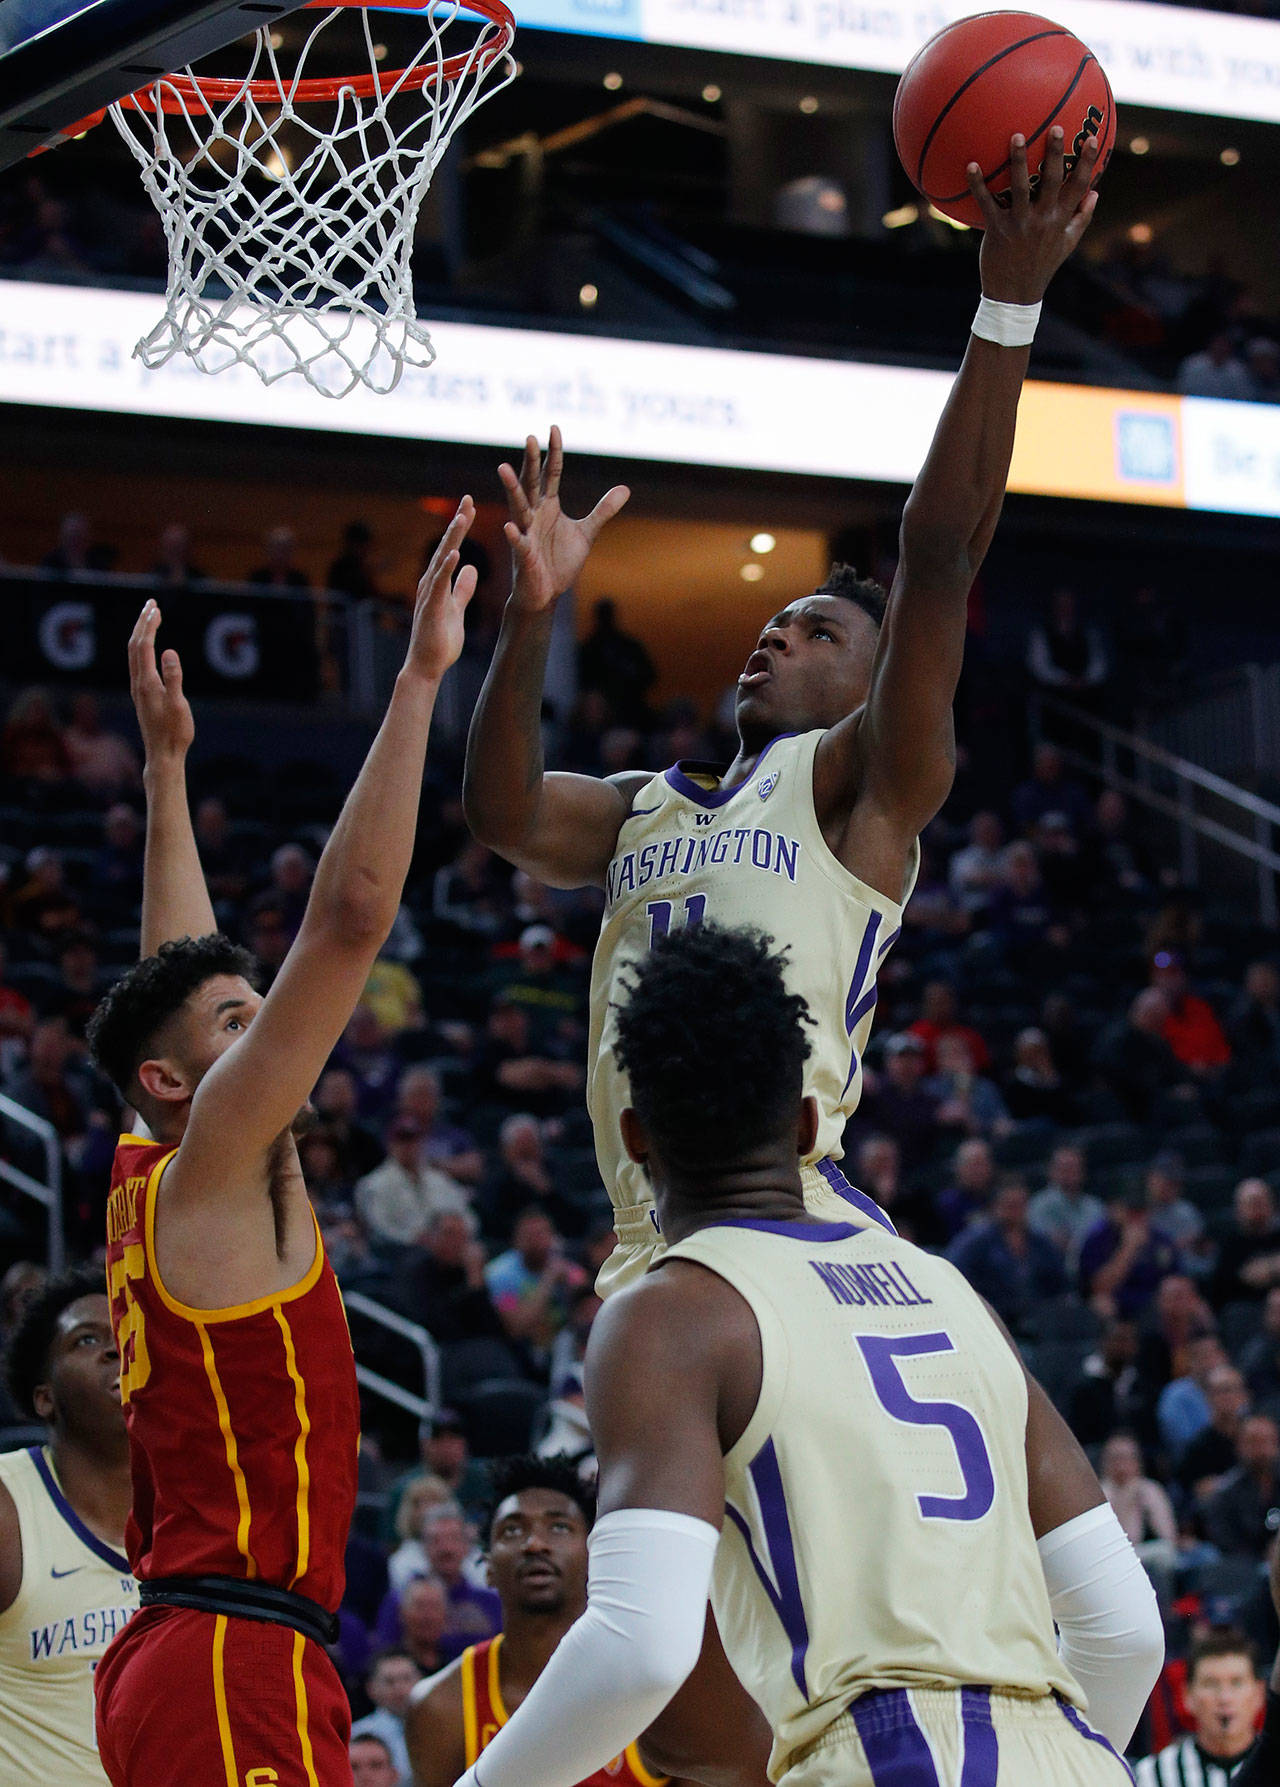 Washington’s Nahziah Carter shoots over Southern California’s Bennie Boatwright during the first half of Sunday’s Pac-12 men’s tournament game in Las Vegas. (AP Photo/John Locher)